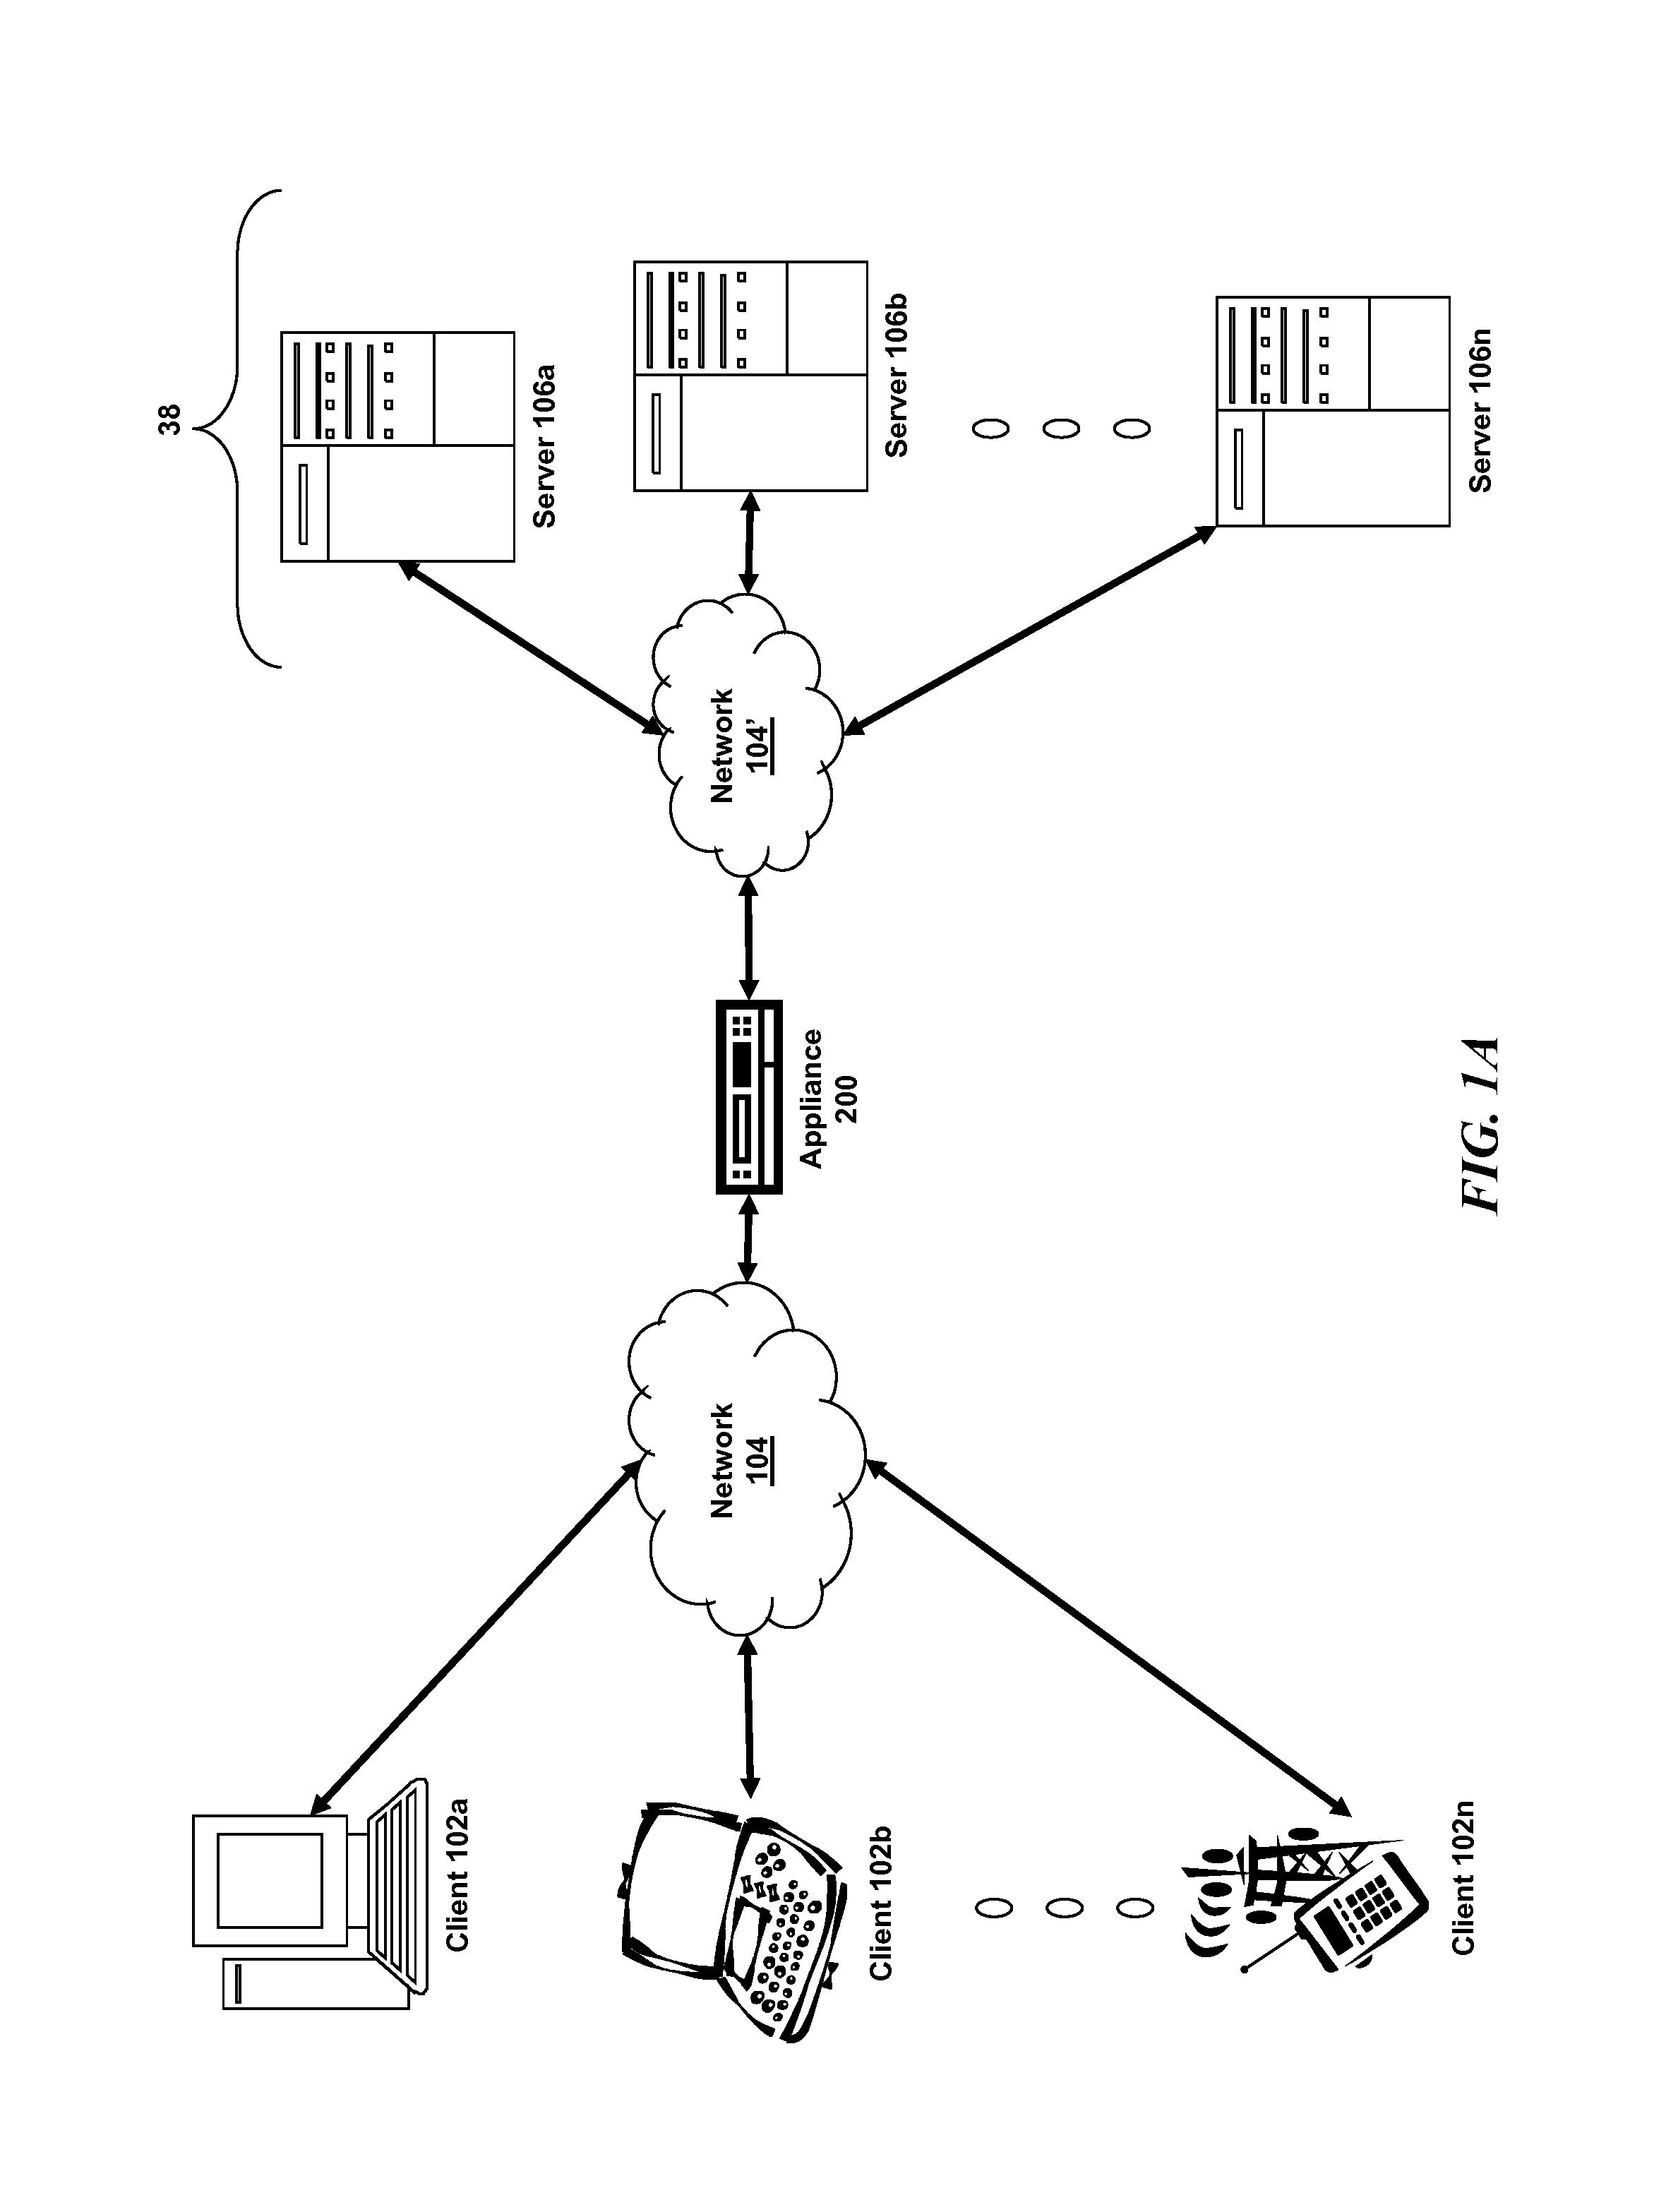 Systems and methods for cloud-based probing and diagnostics